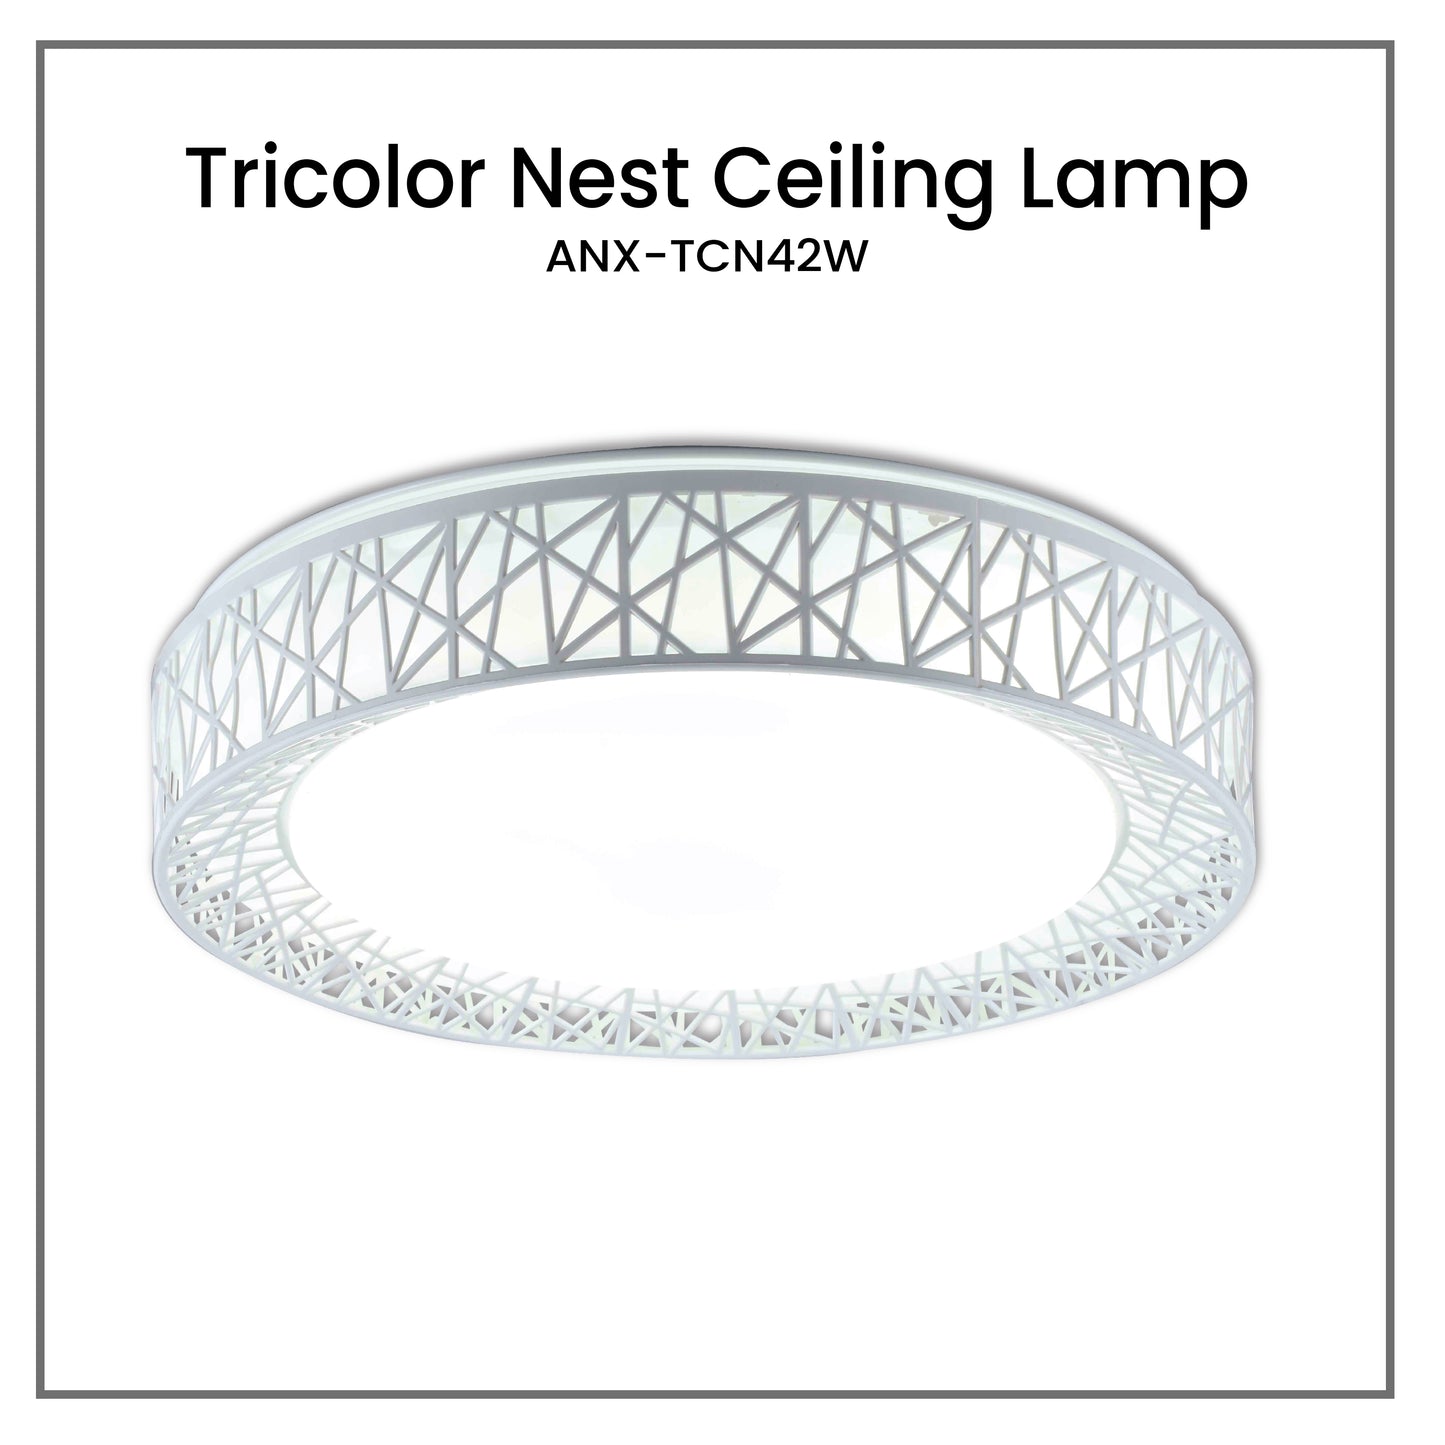 Nxled Nest Ceiling Tricolor Light (ANX-TCN42W)